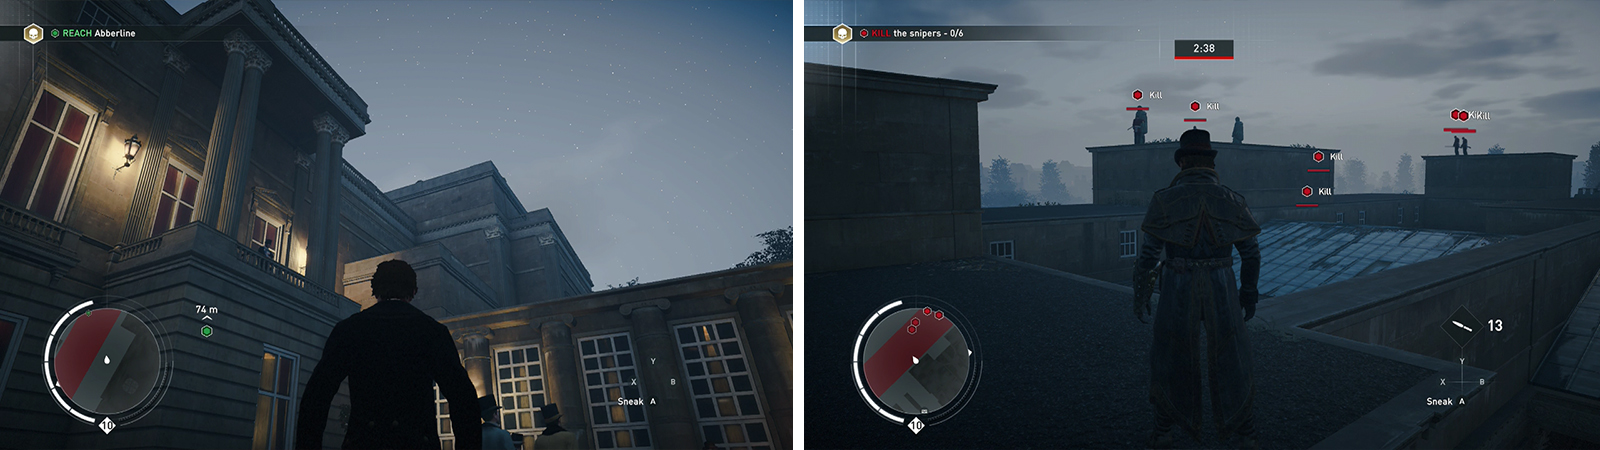 As Jacob climb to the roof (left) to retrieve your gear. Take out the Snipers that appear in less than 3 minutes (right).